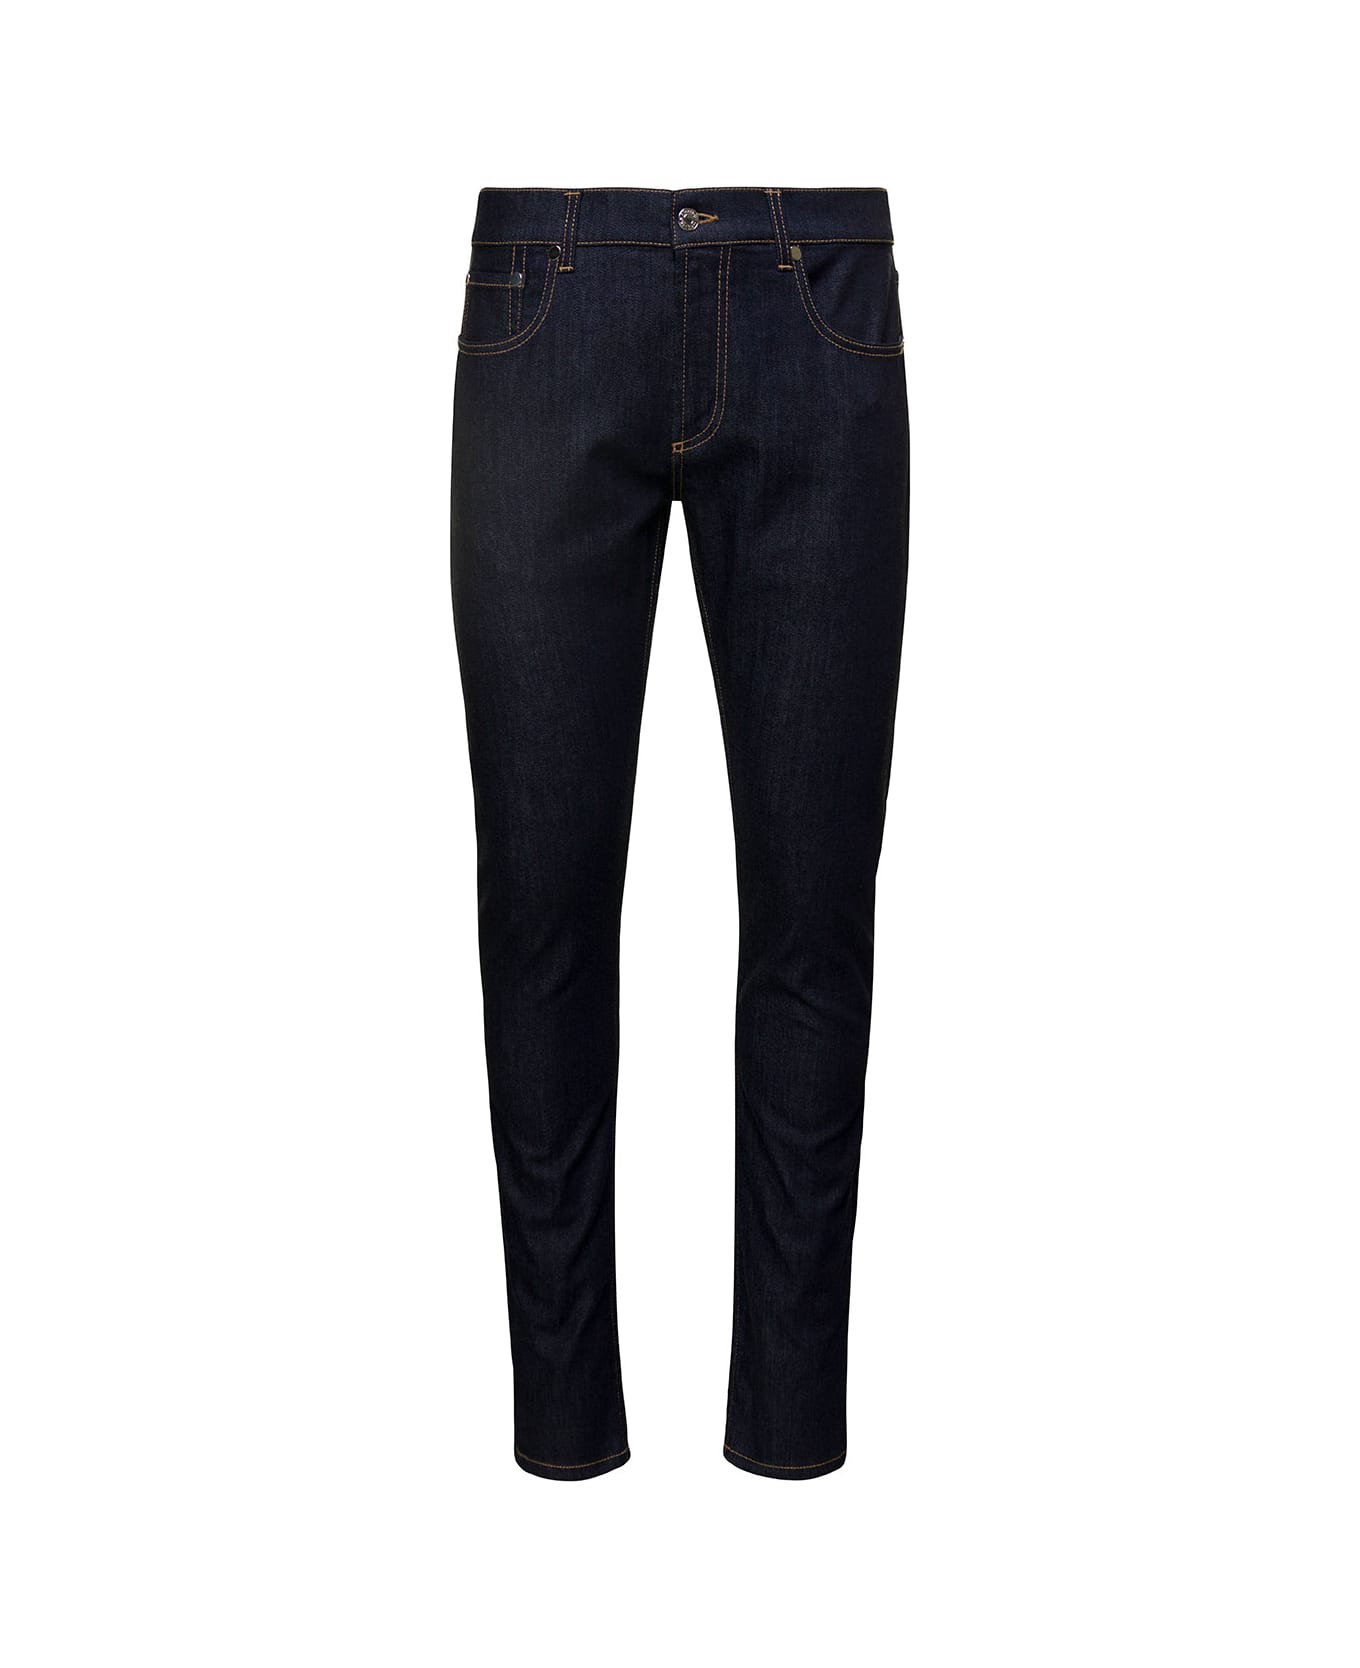 Alexander McQueen Blue Tight Pants With Metallic Logo Patch And Contrasting Stitching In Cotton Denim Man - Blu デニム